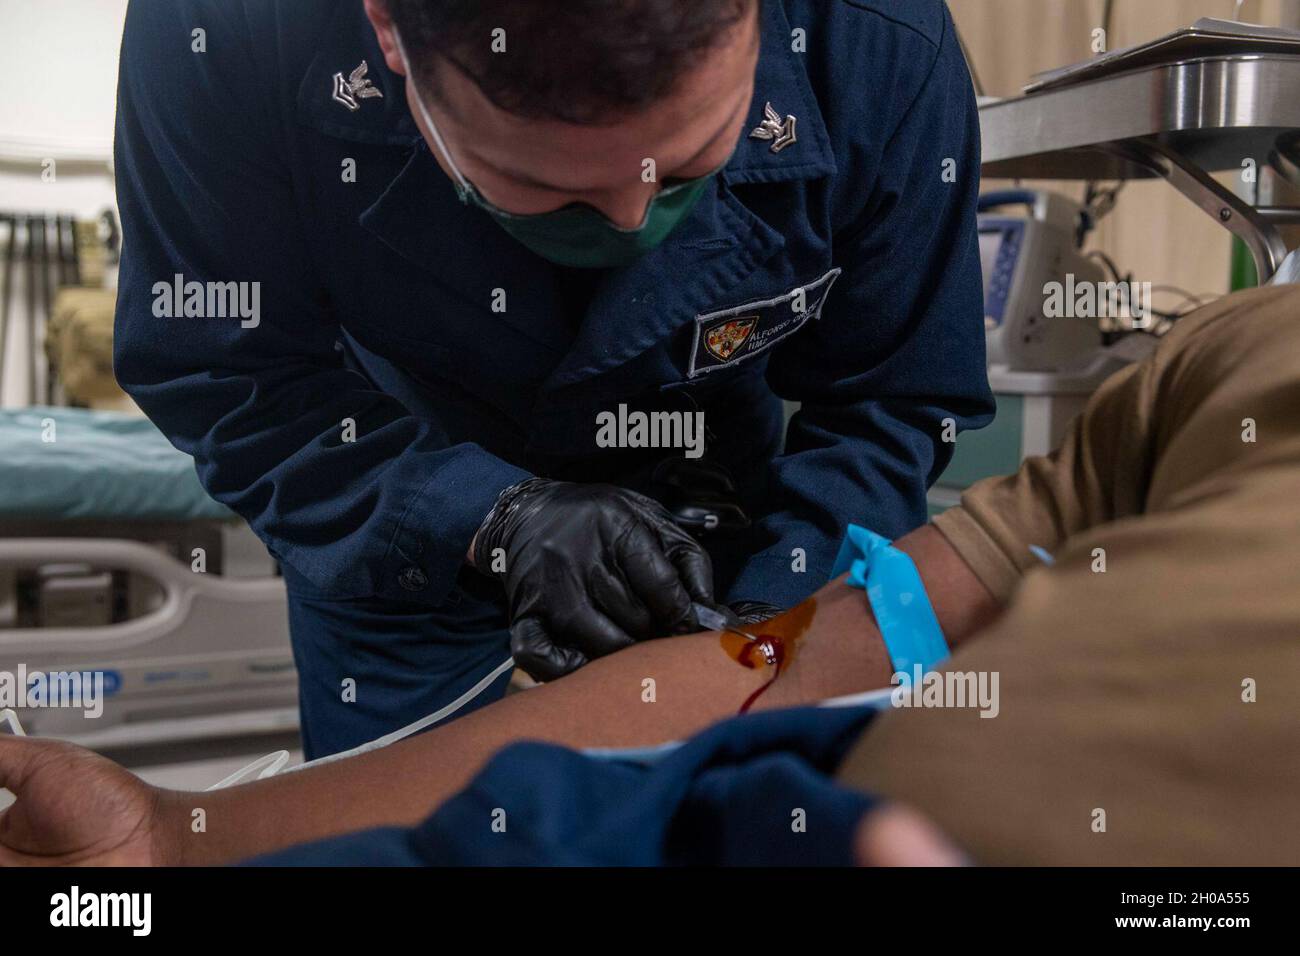 210105-N-JC800-1010     INDIAN OCEAN (Jan. 5, 2021) – U.S. Navy Hospital Corpsman 2nd Class Alfonso Chavez, assigned to medical department, draws blood from a patient in the medical ward aboard the amphibious transport dock ship USS Somerset (LPD 25). The Makin Island Amphibious Ready Group and the 15th Marine Expeditionary Unit are conducting operations in the 6th Fleet area of responsibility. Stock Photo